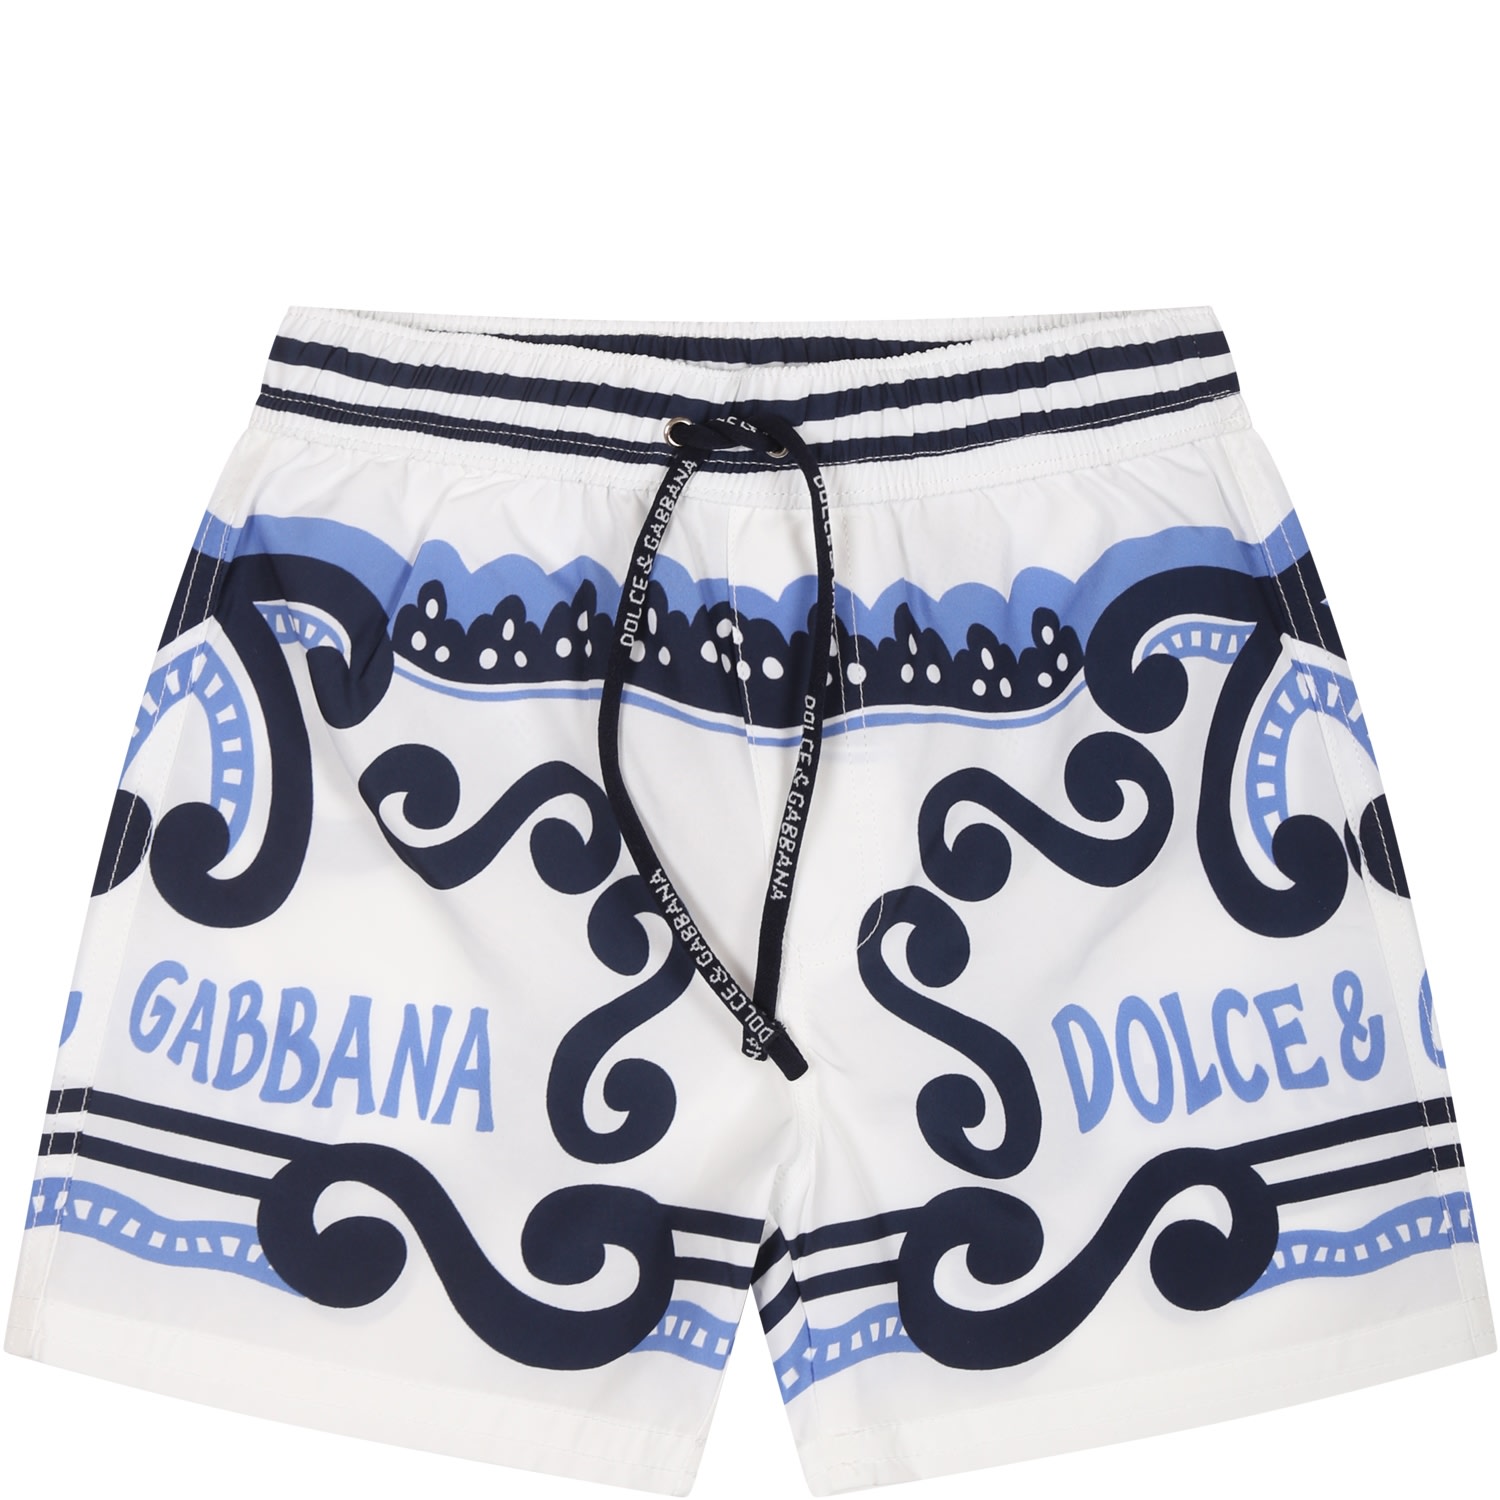 DOLCE & GABBANA WHITE SWIMSUIT FOR BABY BOY WITH BANDANA PRINT AND LOGO